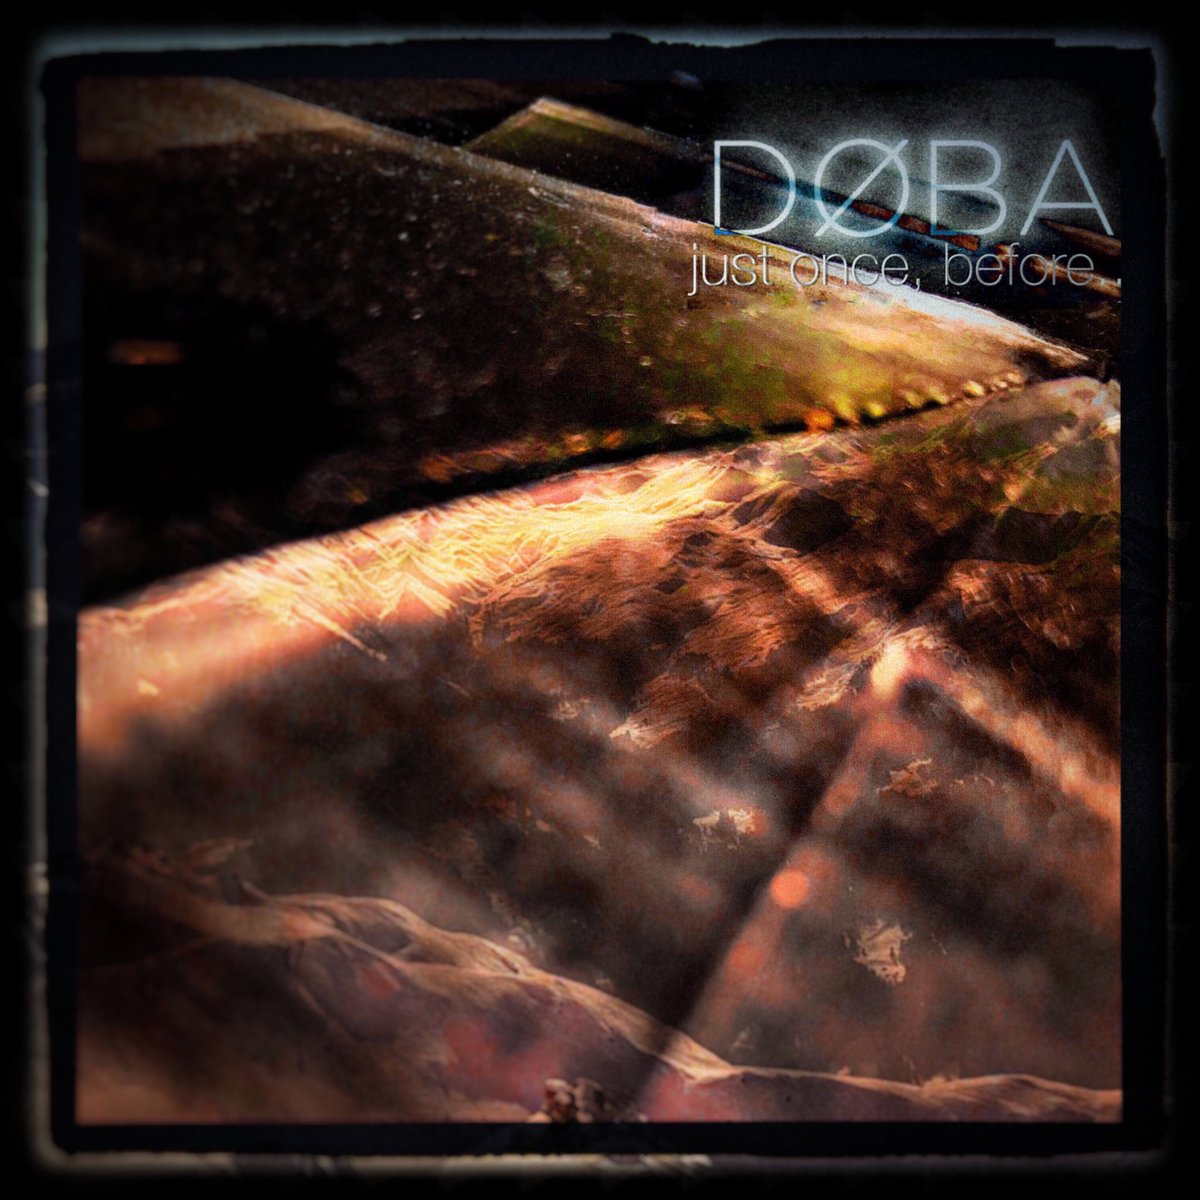 Just once, before....
Our first single release. Coming very soon.
#DØBA #2019goals #newmusic #indiemusic #newsingle #Nottingham #indie #nottinghammusicscene #derby #derbymusic #midlandsmusic #indiependent #independentmusicscene #bbcintroducing #bbcintroducingnottingham